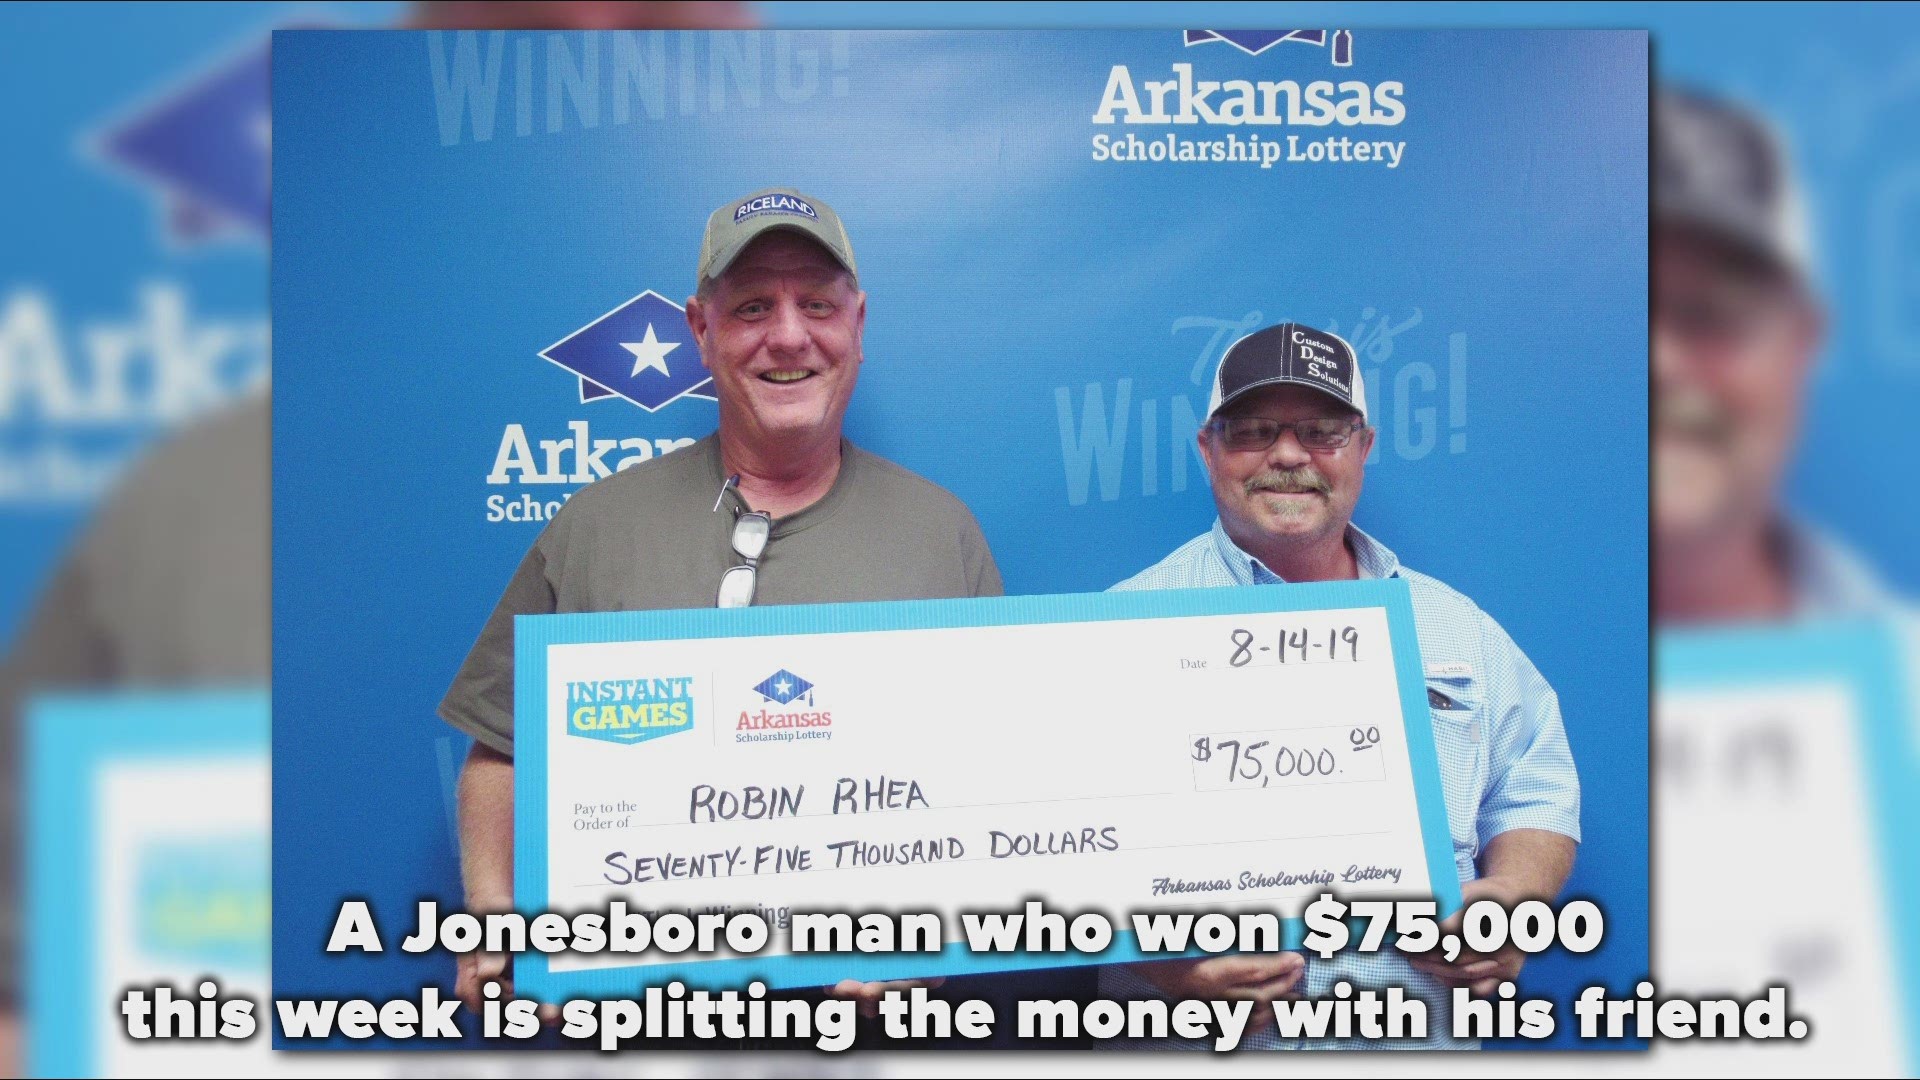 The two men have a tradition of alternating buying lottery tickets a couple of times each week.